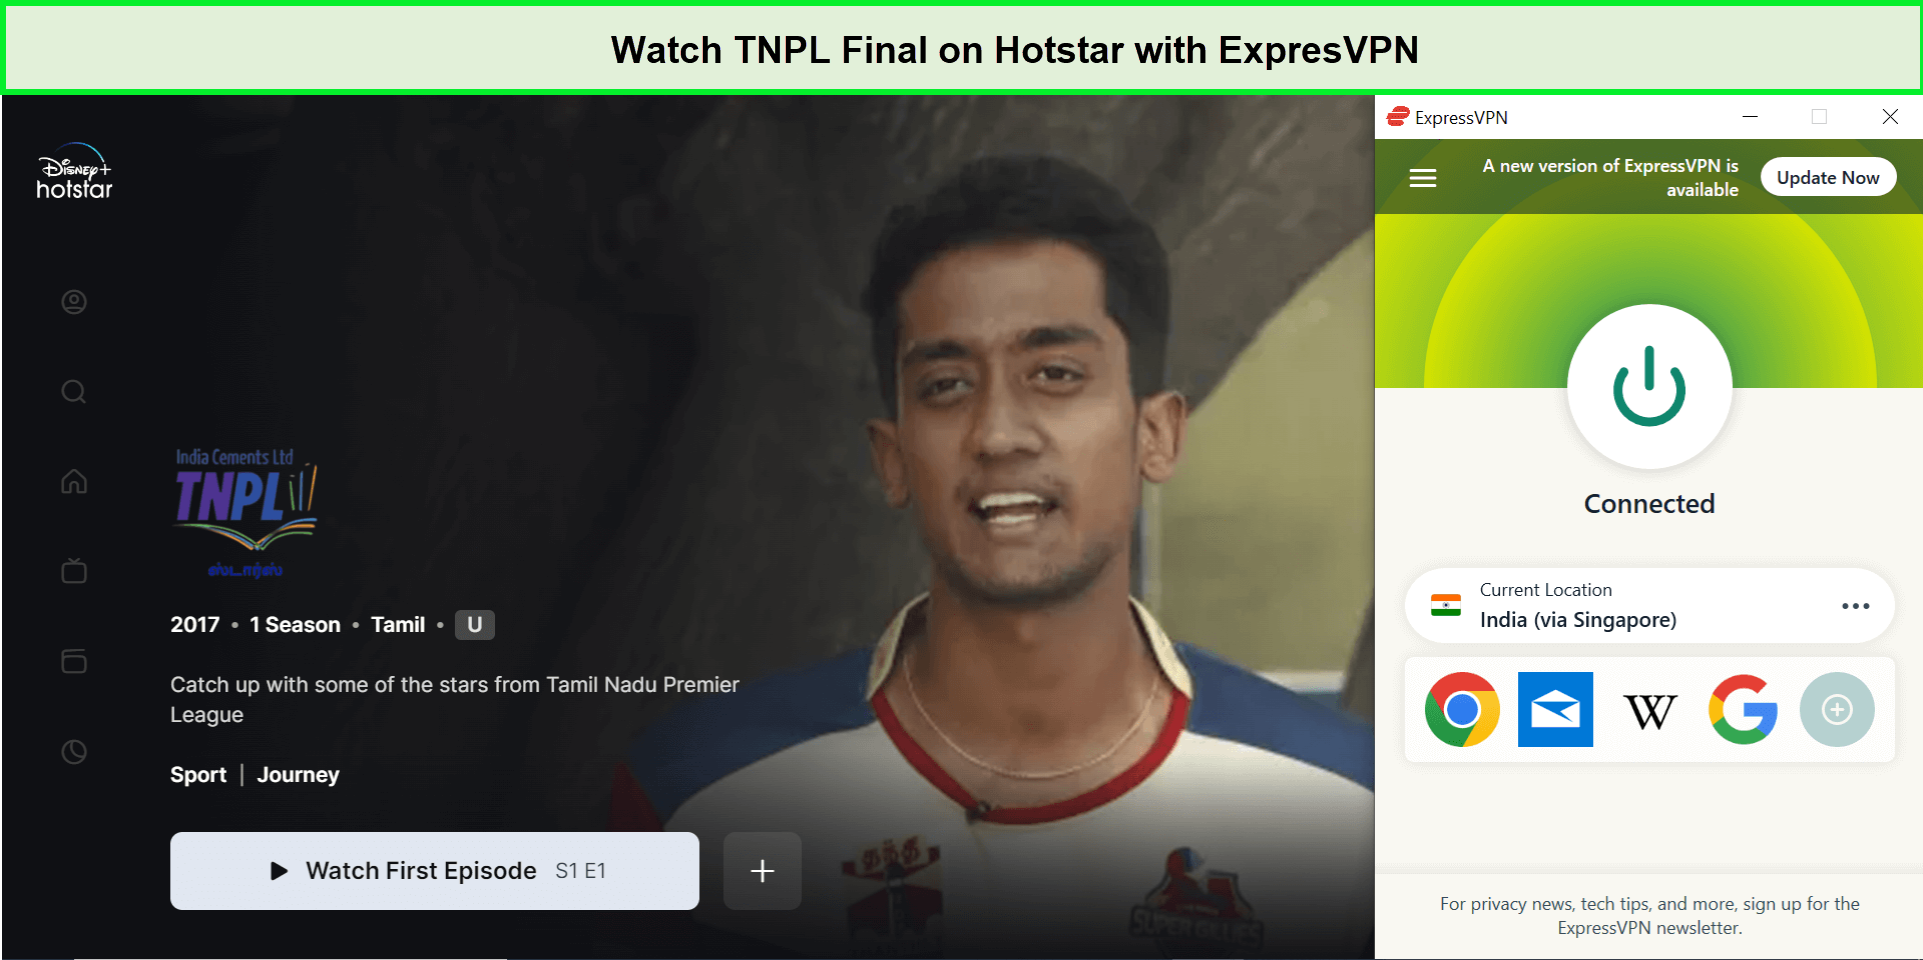 Watch-TNPL-Final-in-Italy-on-Hotstar-with-ExpresVPN